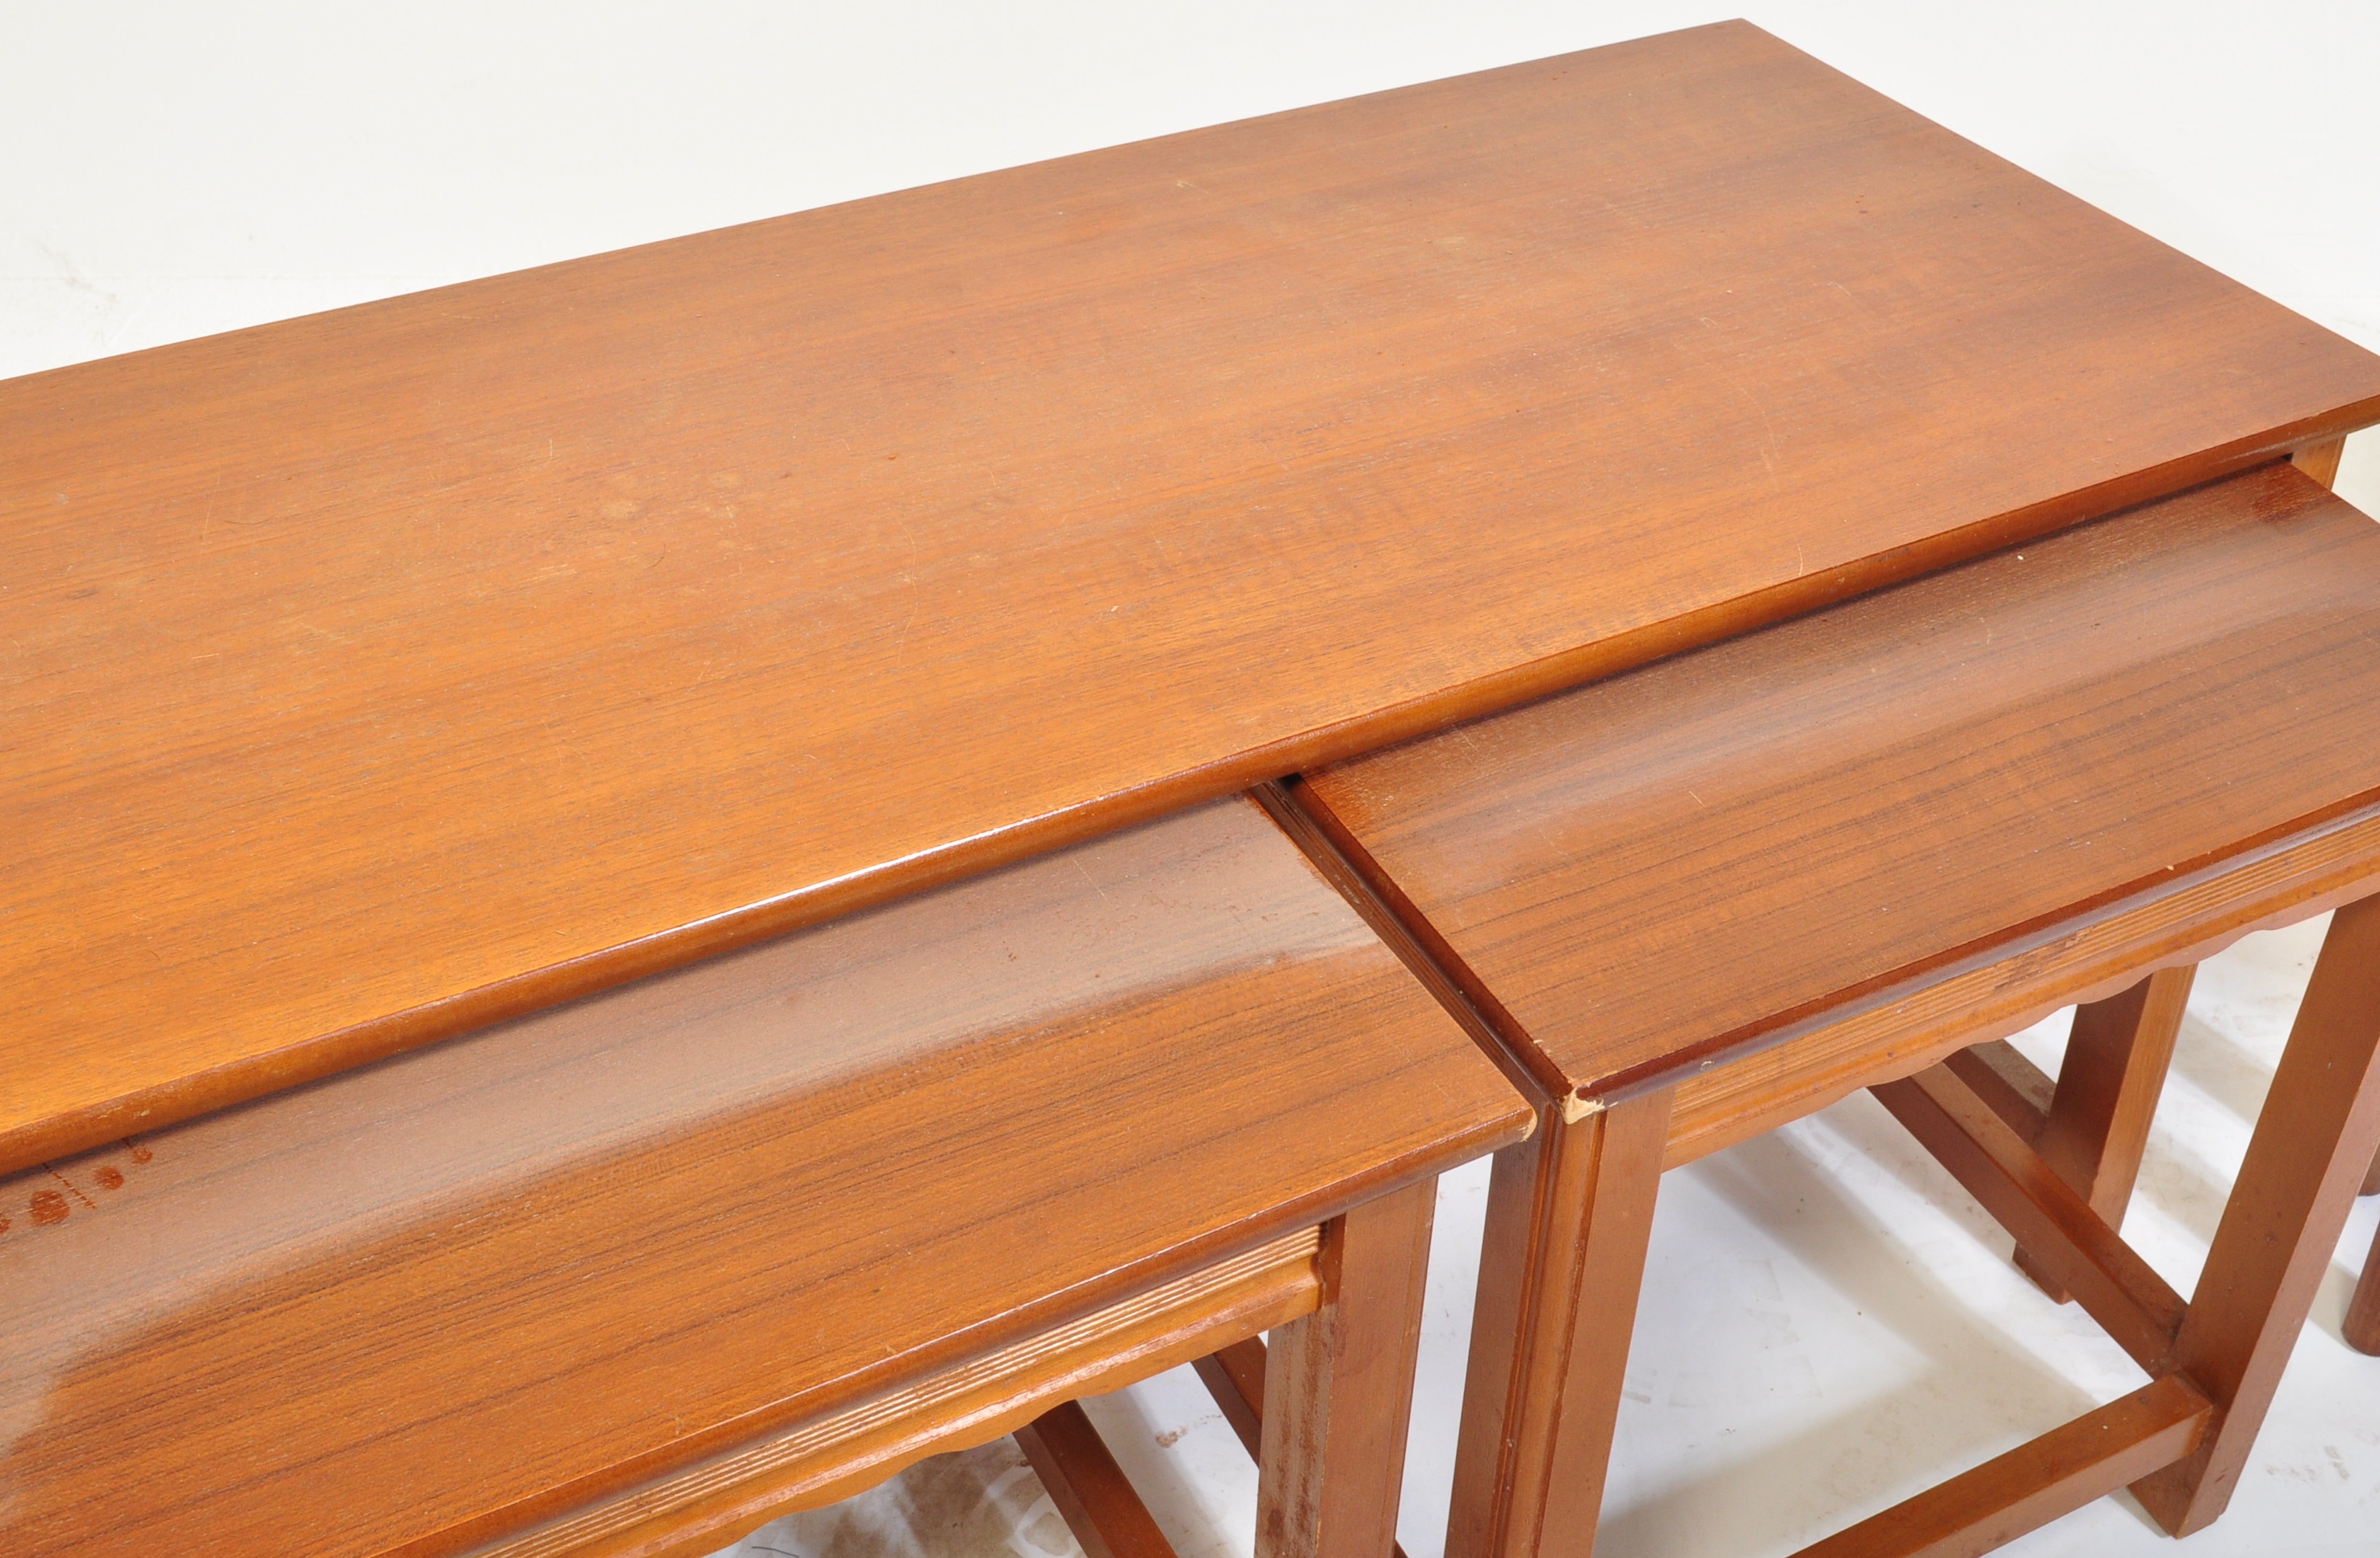 TWO RETRO VINTAGE MID 20TH CENTURY 1960S TEAK WOOD NESTS OF TABLES - Image 4 of 4